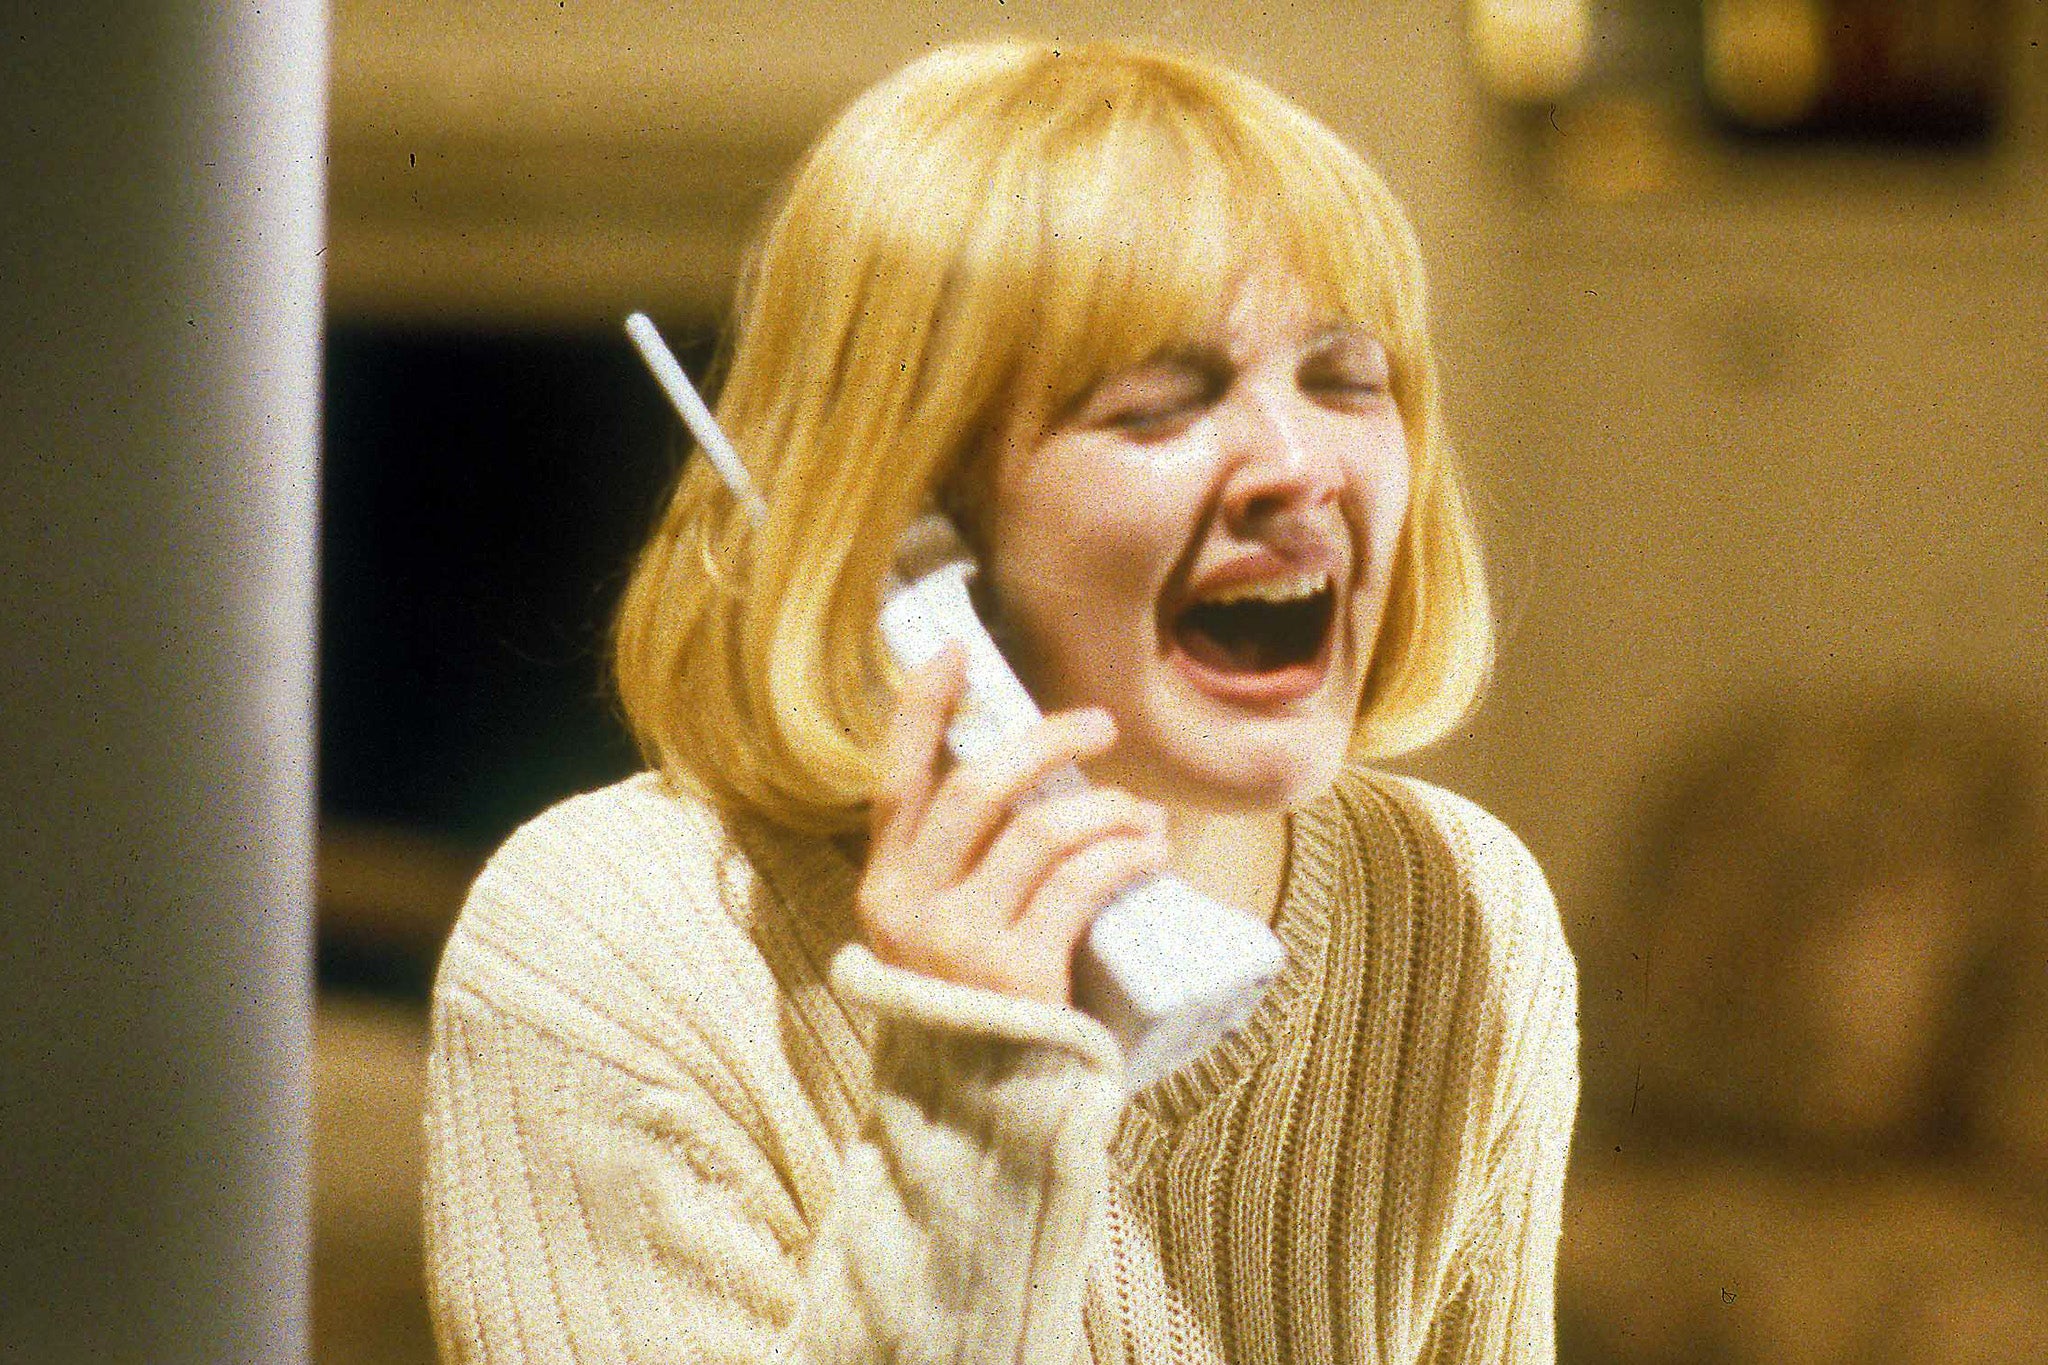 Should have waited for a voice note: Drew Barrymore regrets picking up the phone in the horror film ‘Scream’